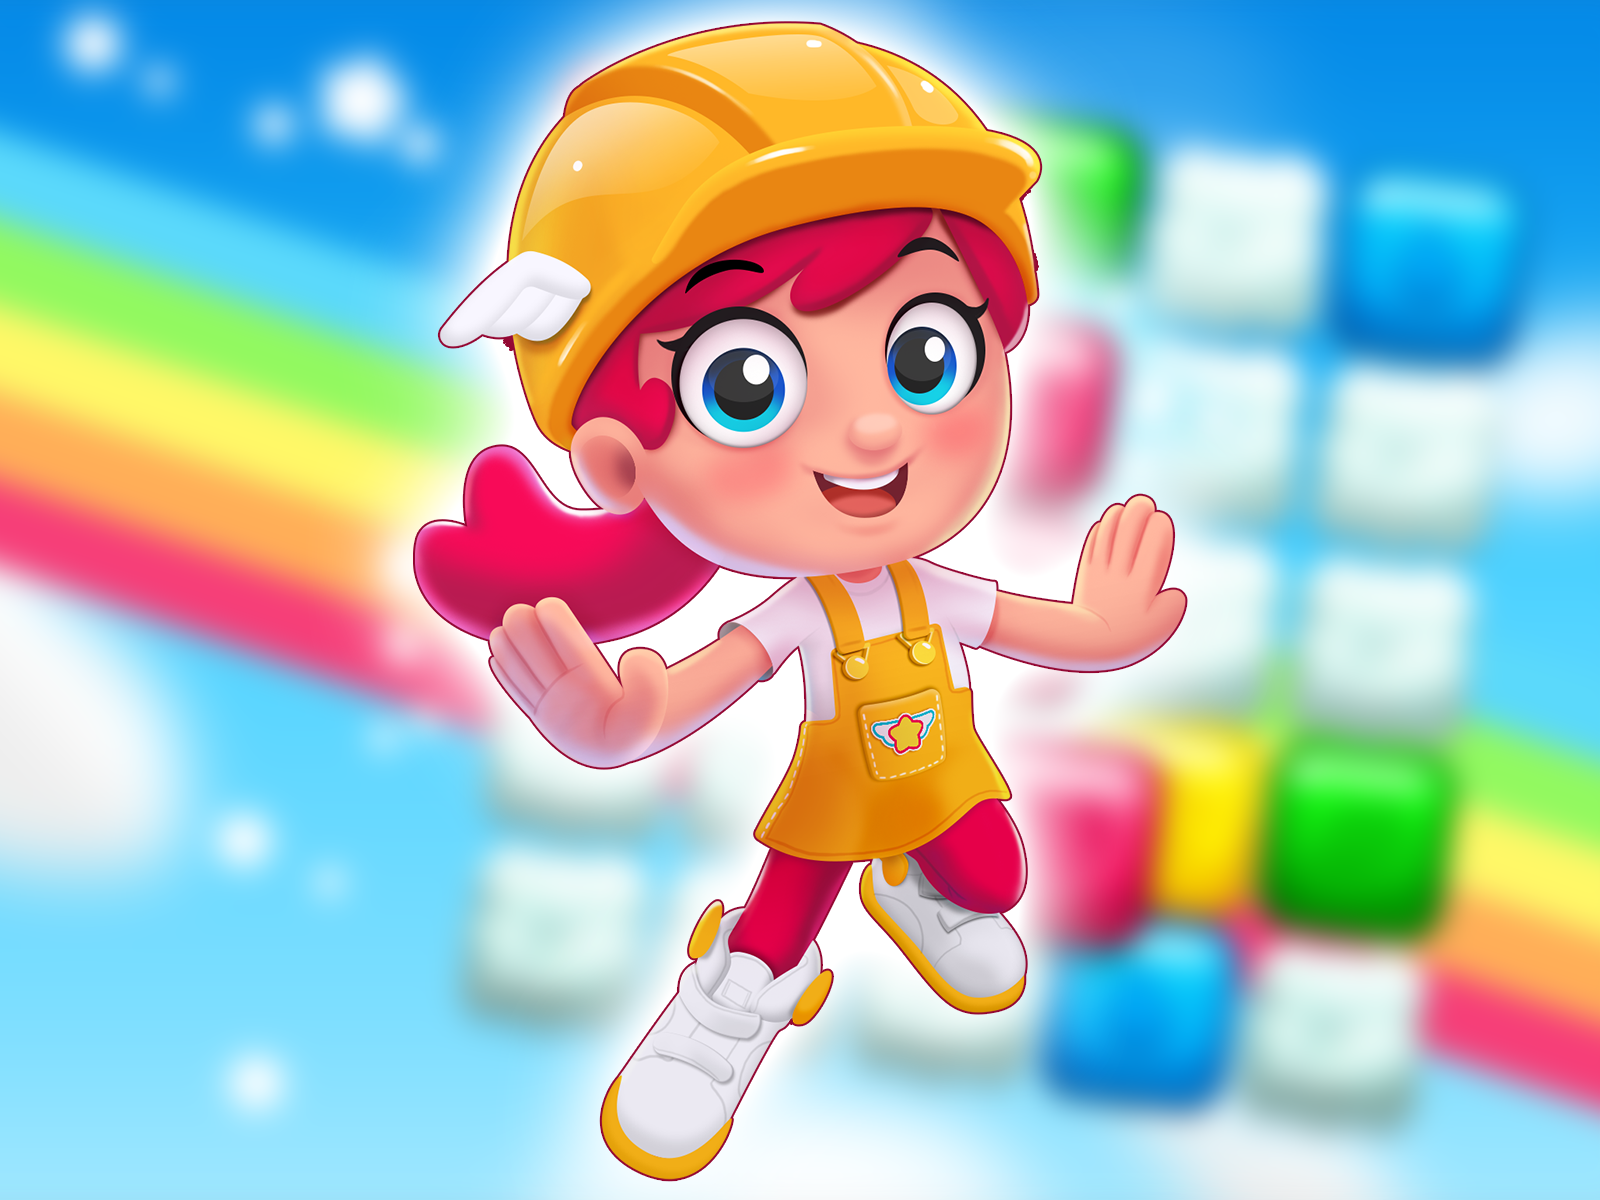 Puzzle Game Character character design colourful mobile game puzzle game